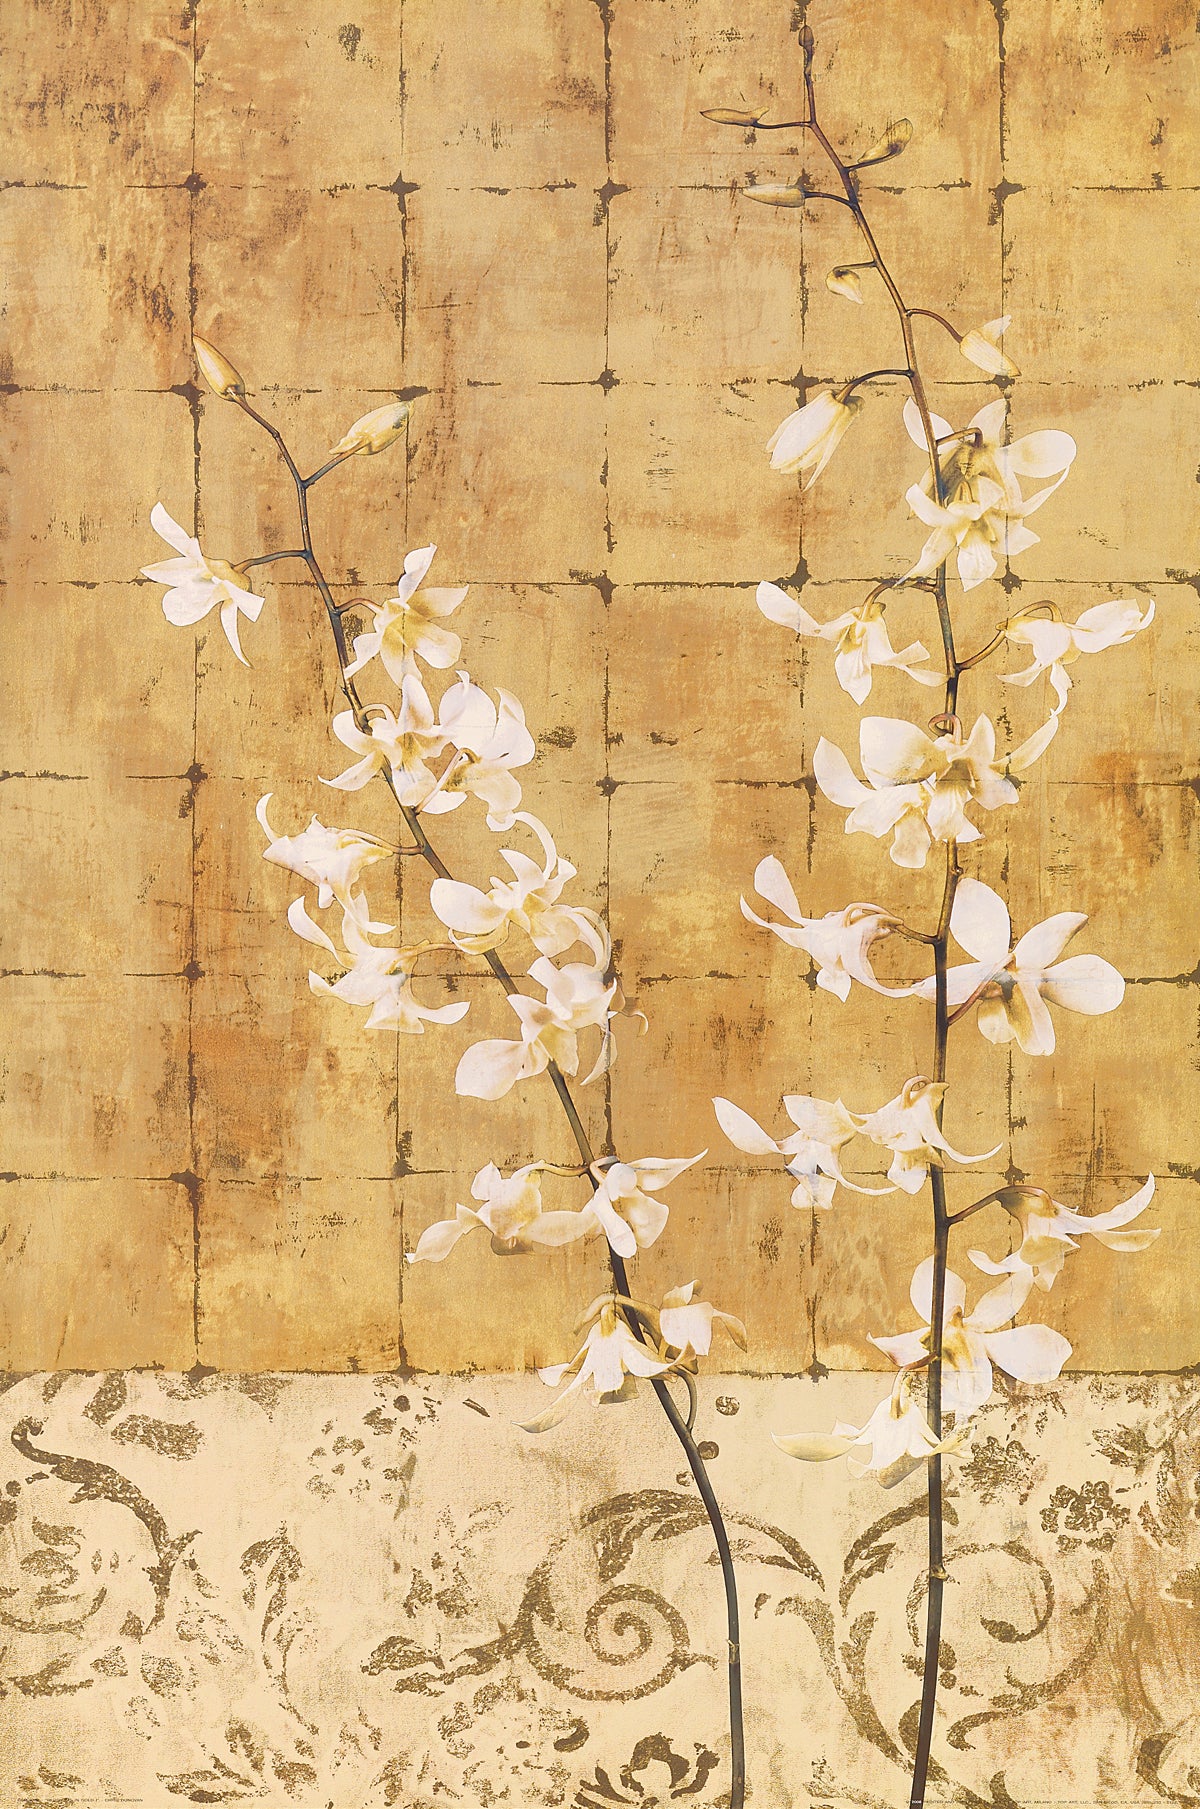 Chris Donovan - Blossoms in Gold I